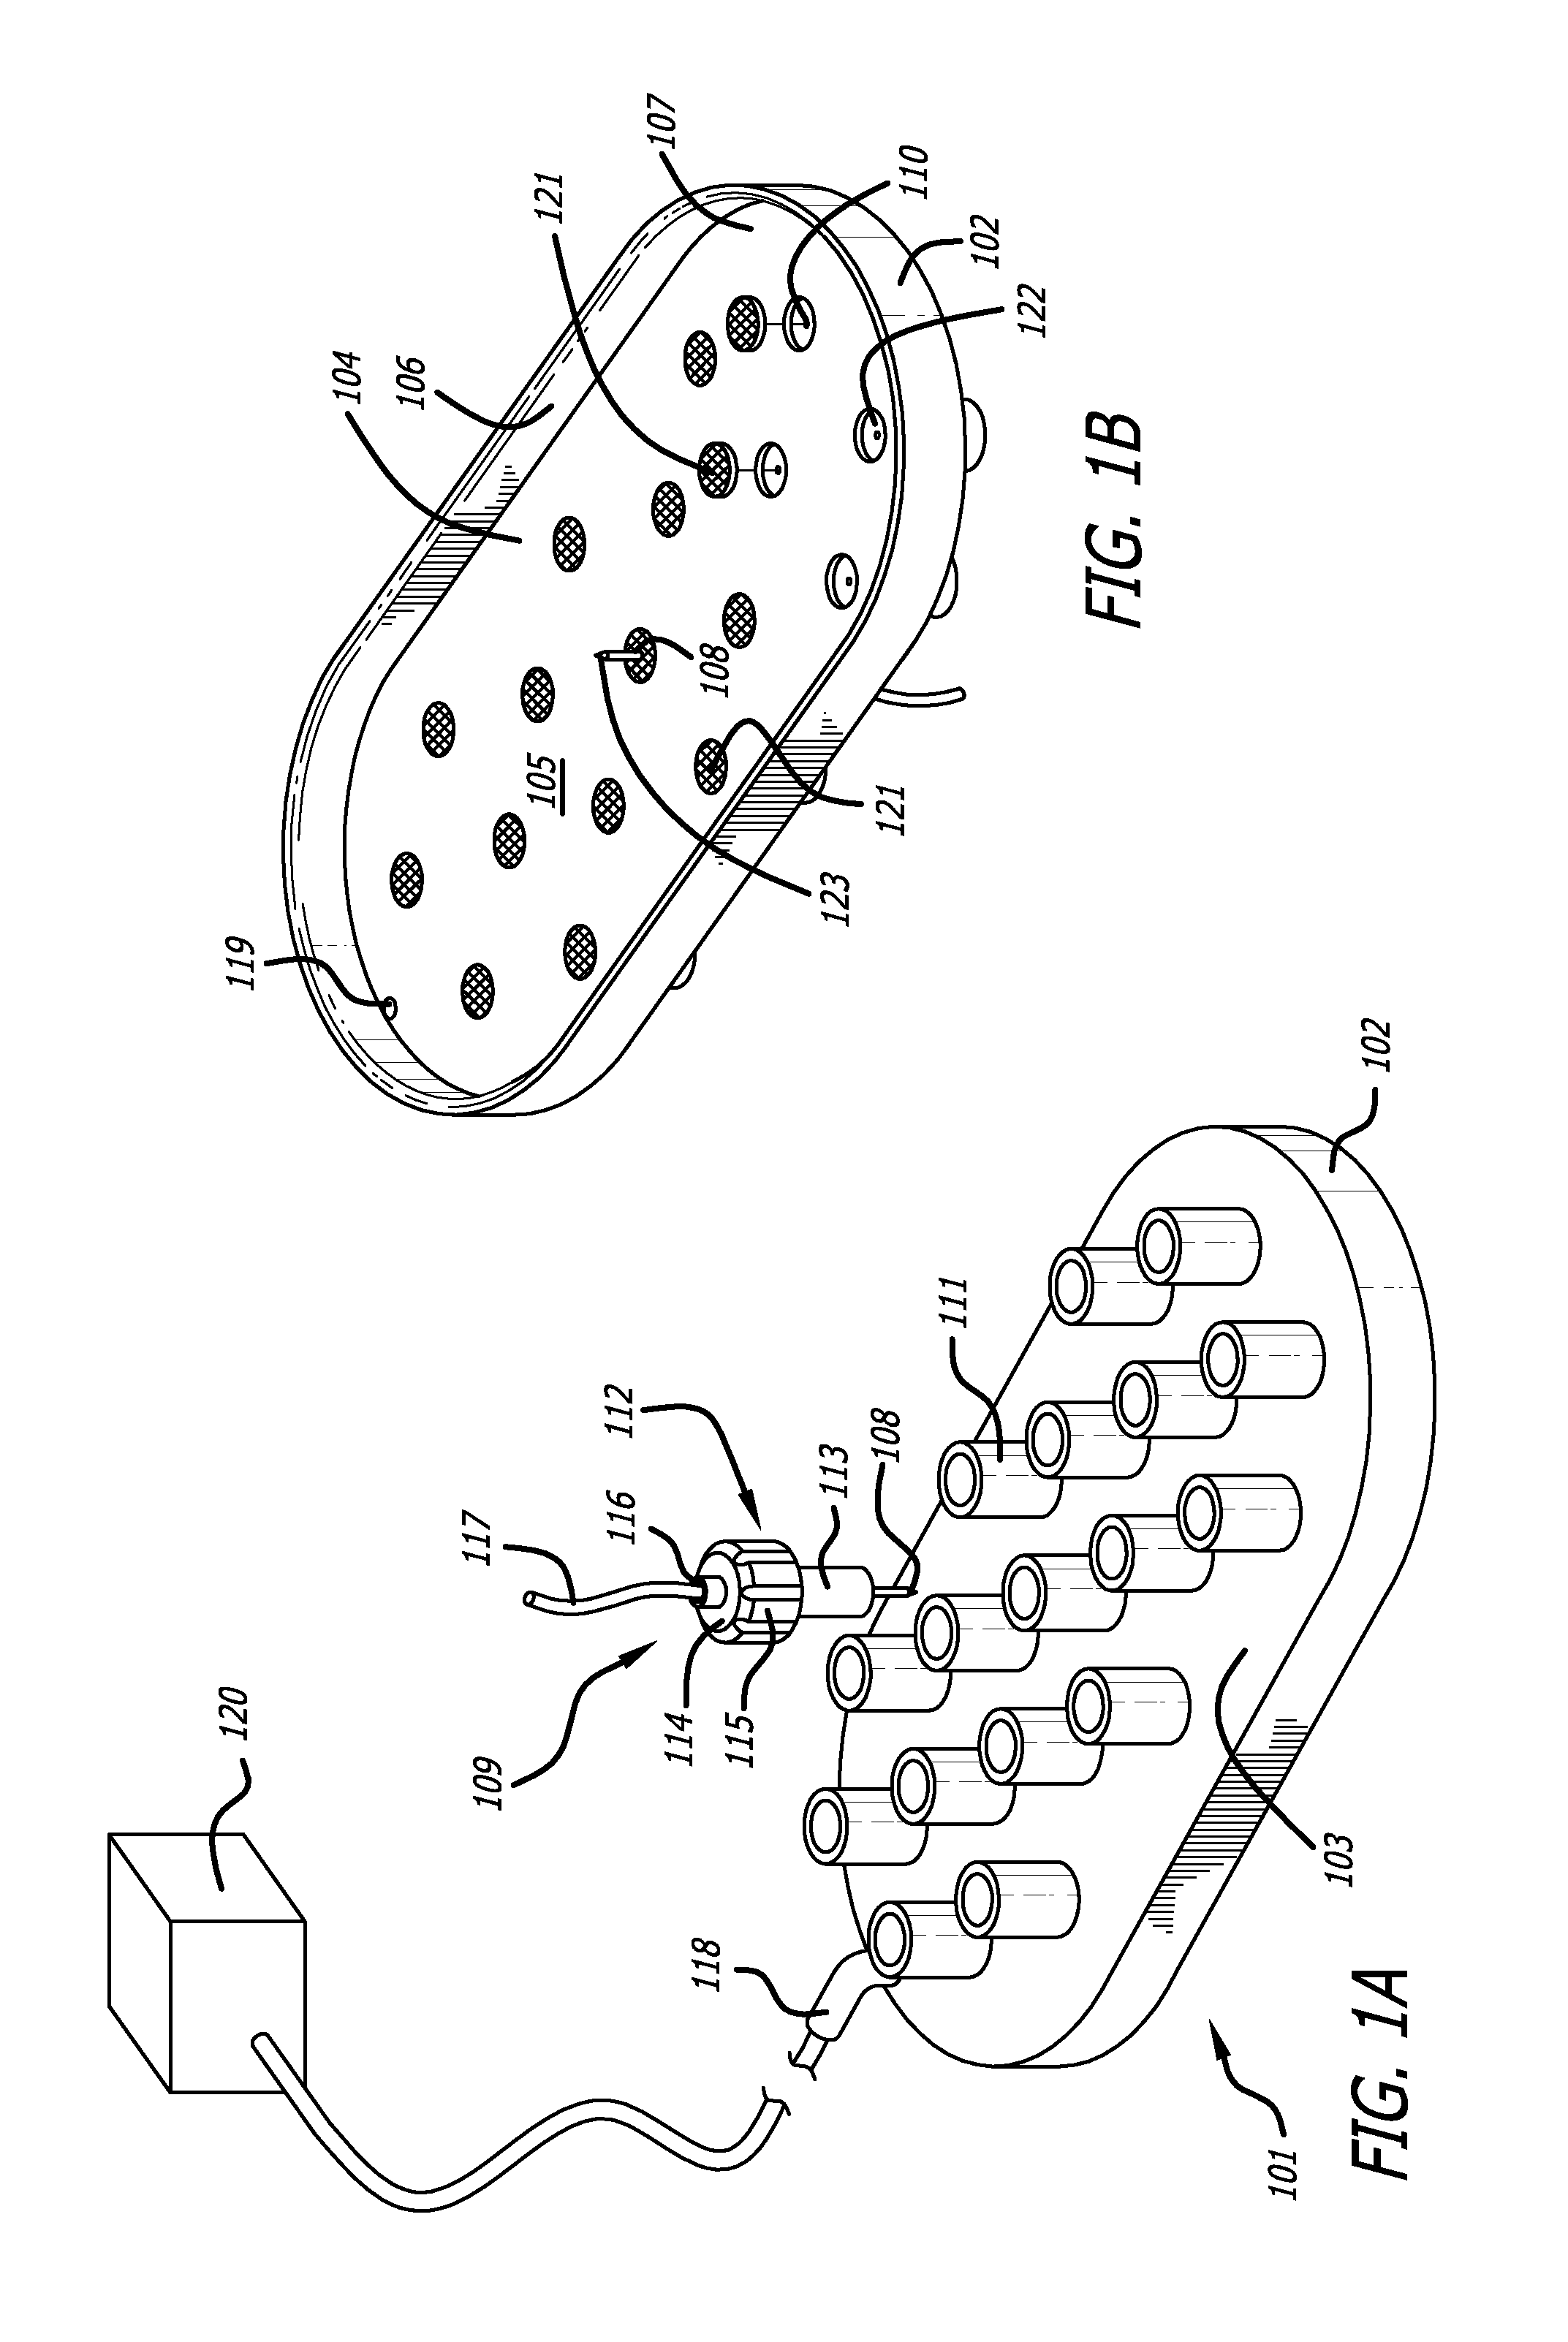 Fluid-jet dissection system and method for reducing the appearance of cellulite